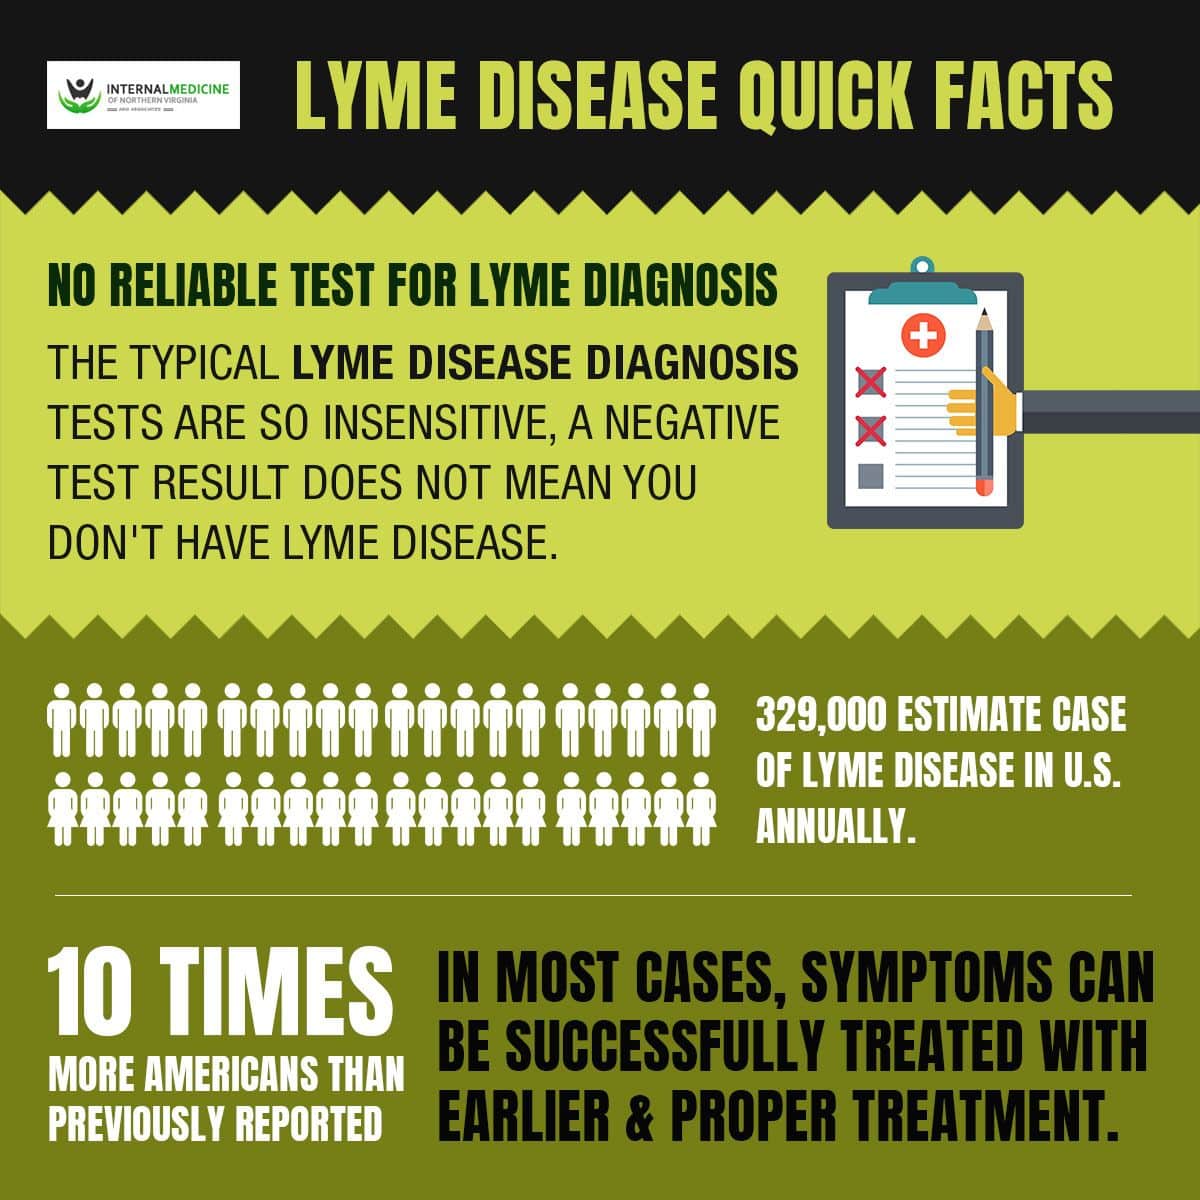 LYME Disease Quick Facts By Lyme Disease Specialist